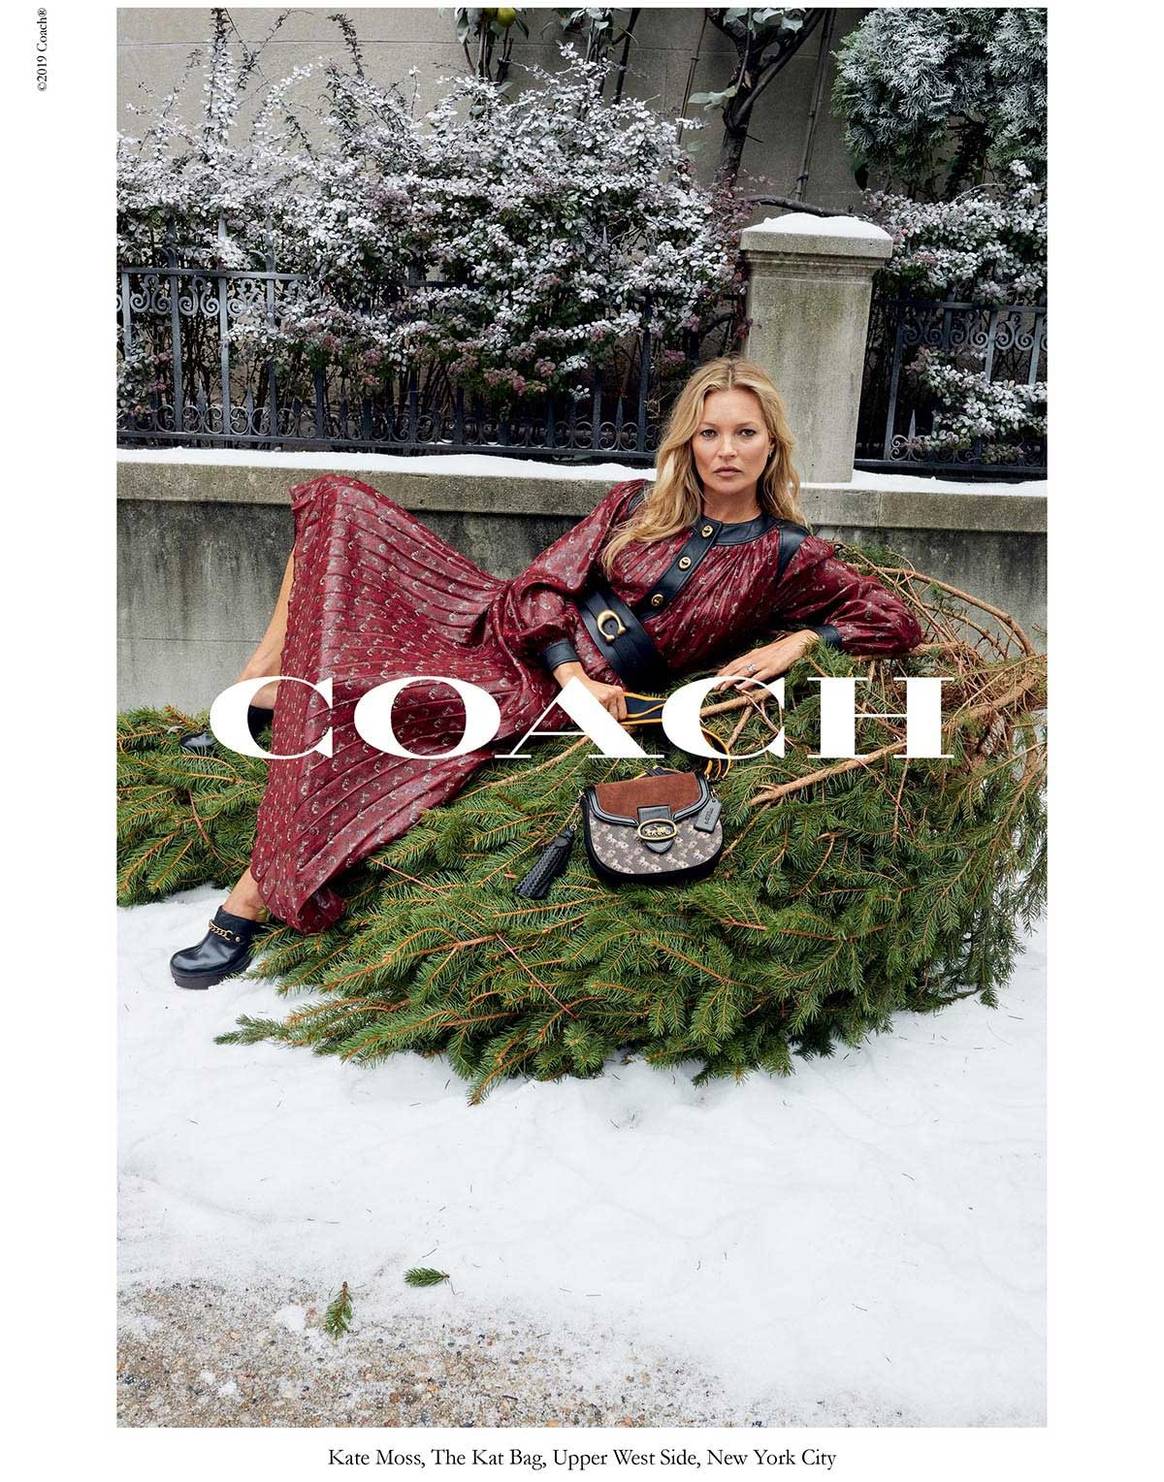 Coach launches “Wonder for All” holiday campaign